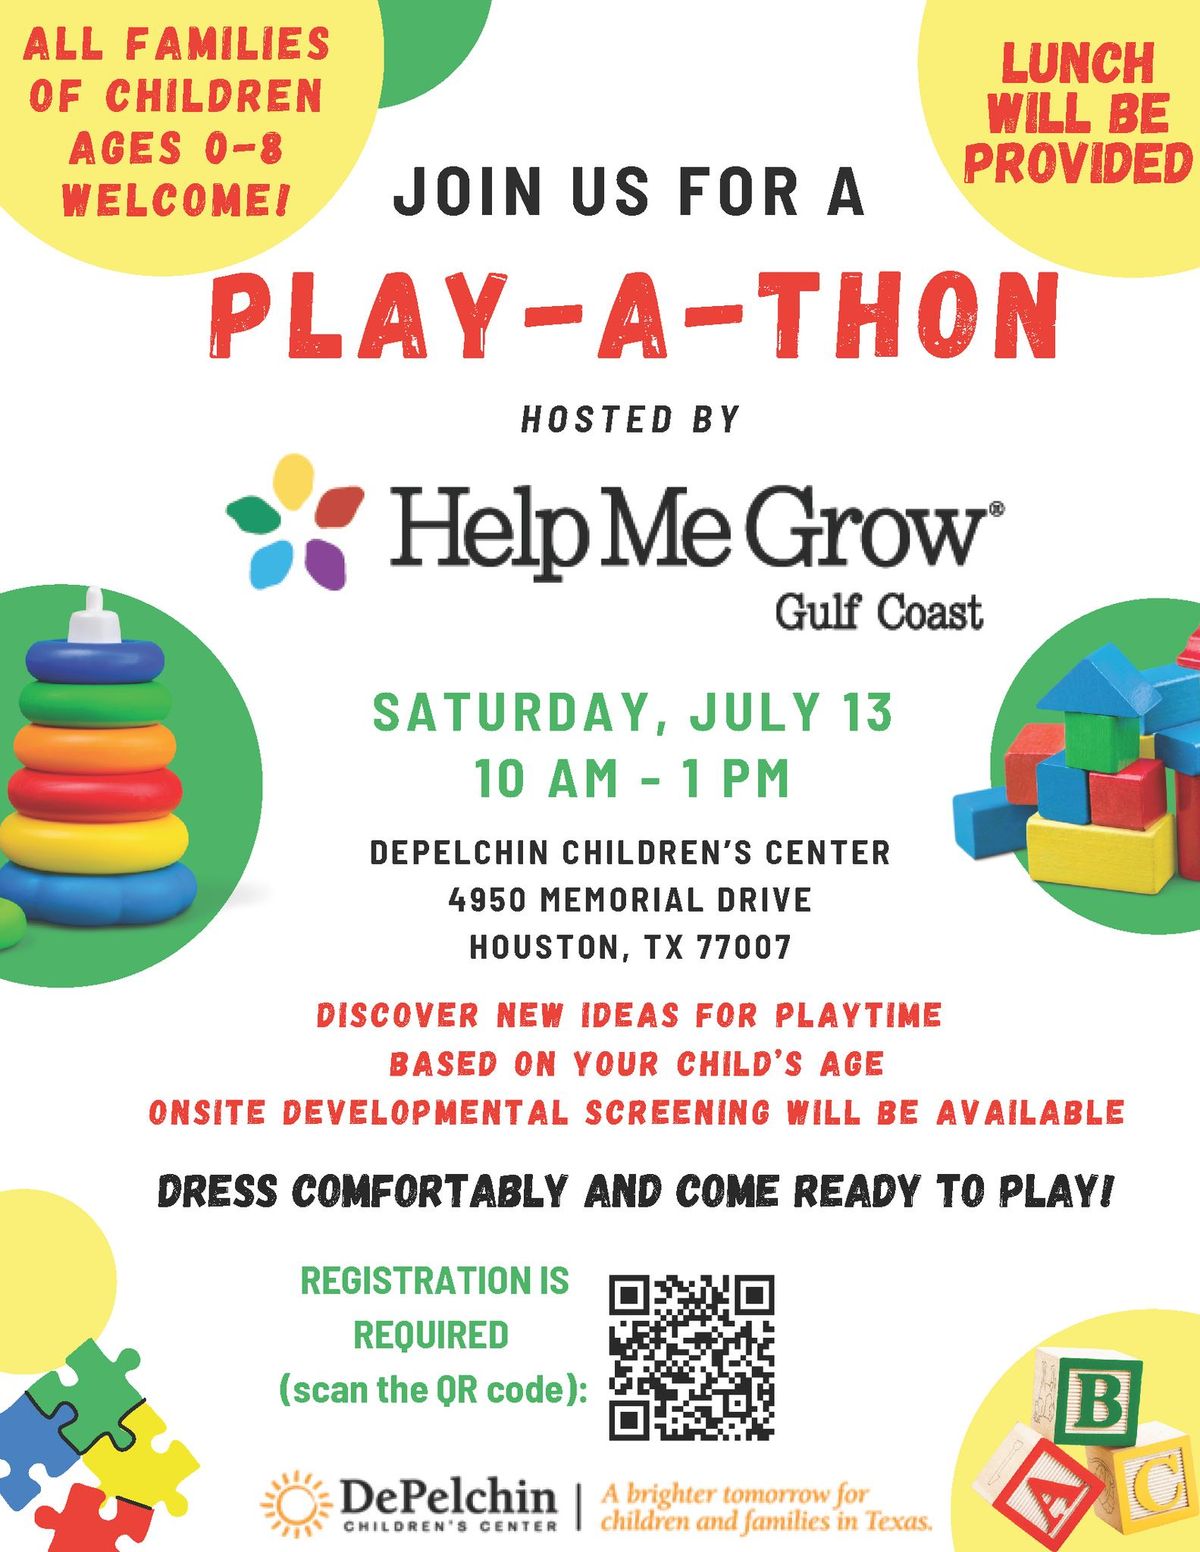 Play-A-Thon - Registration Required